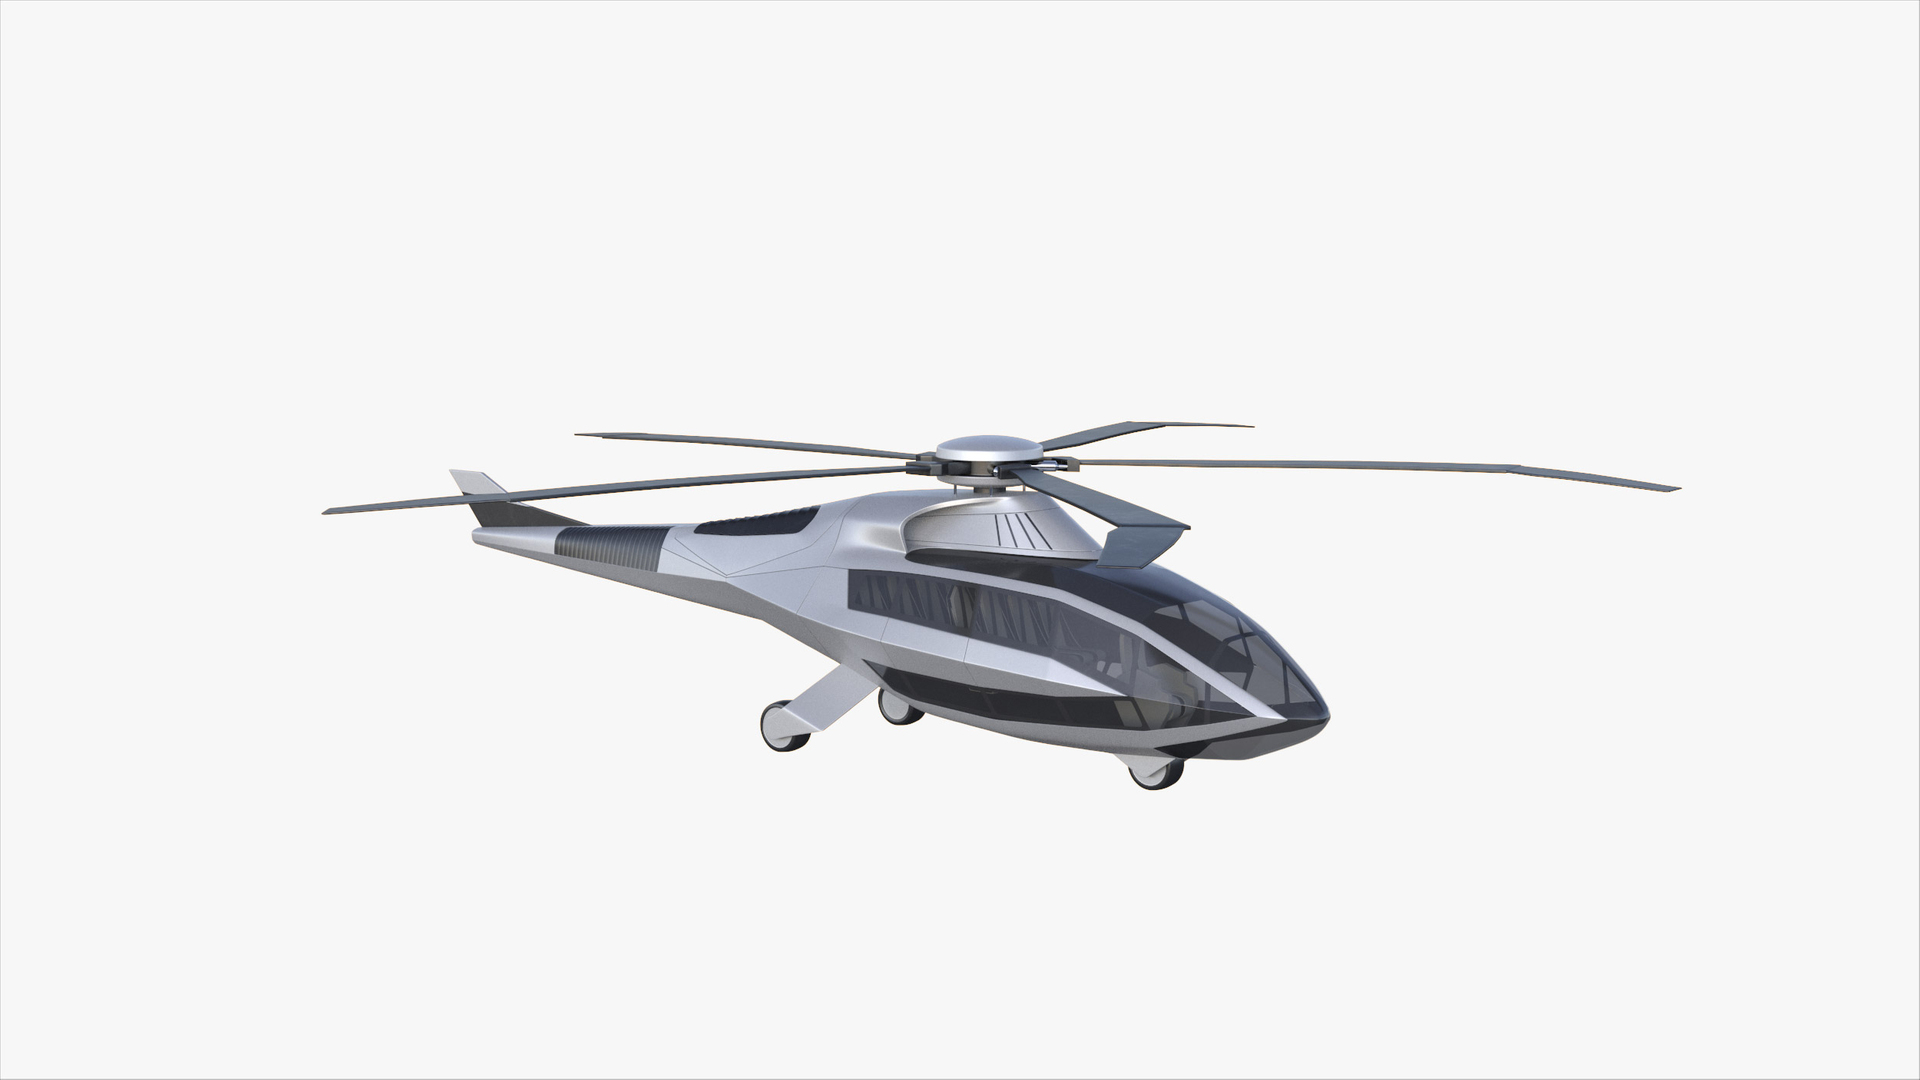 future concept helicopter bell model https://p.turbosquid.com/ts-thumb/Hv/X2mgAH/3PgYSVde/bell_turntable_/jpg/1603714835/1920x1080/turn_fit_q99/3089f1b79c53aa4150a2f25b9b6c368c7c39d4d1/bell_turntable_-1.jpg